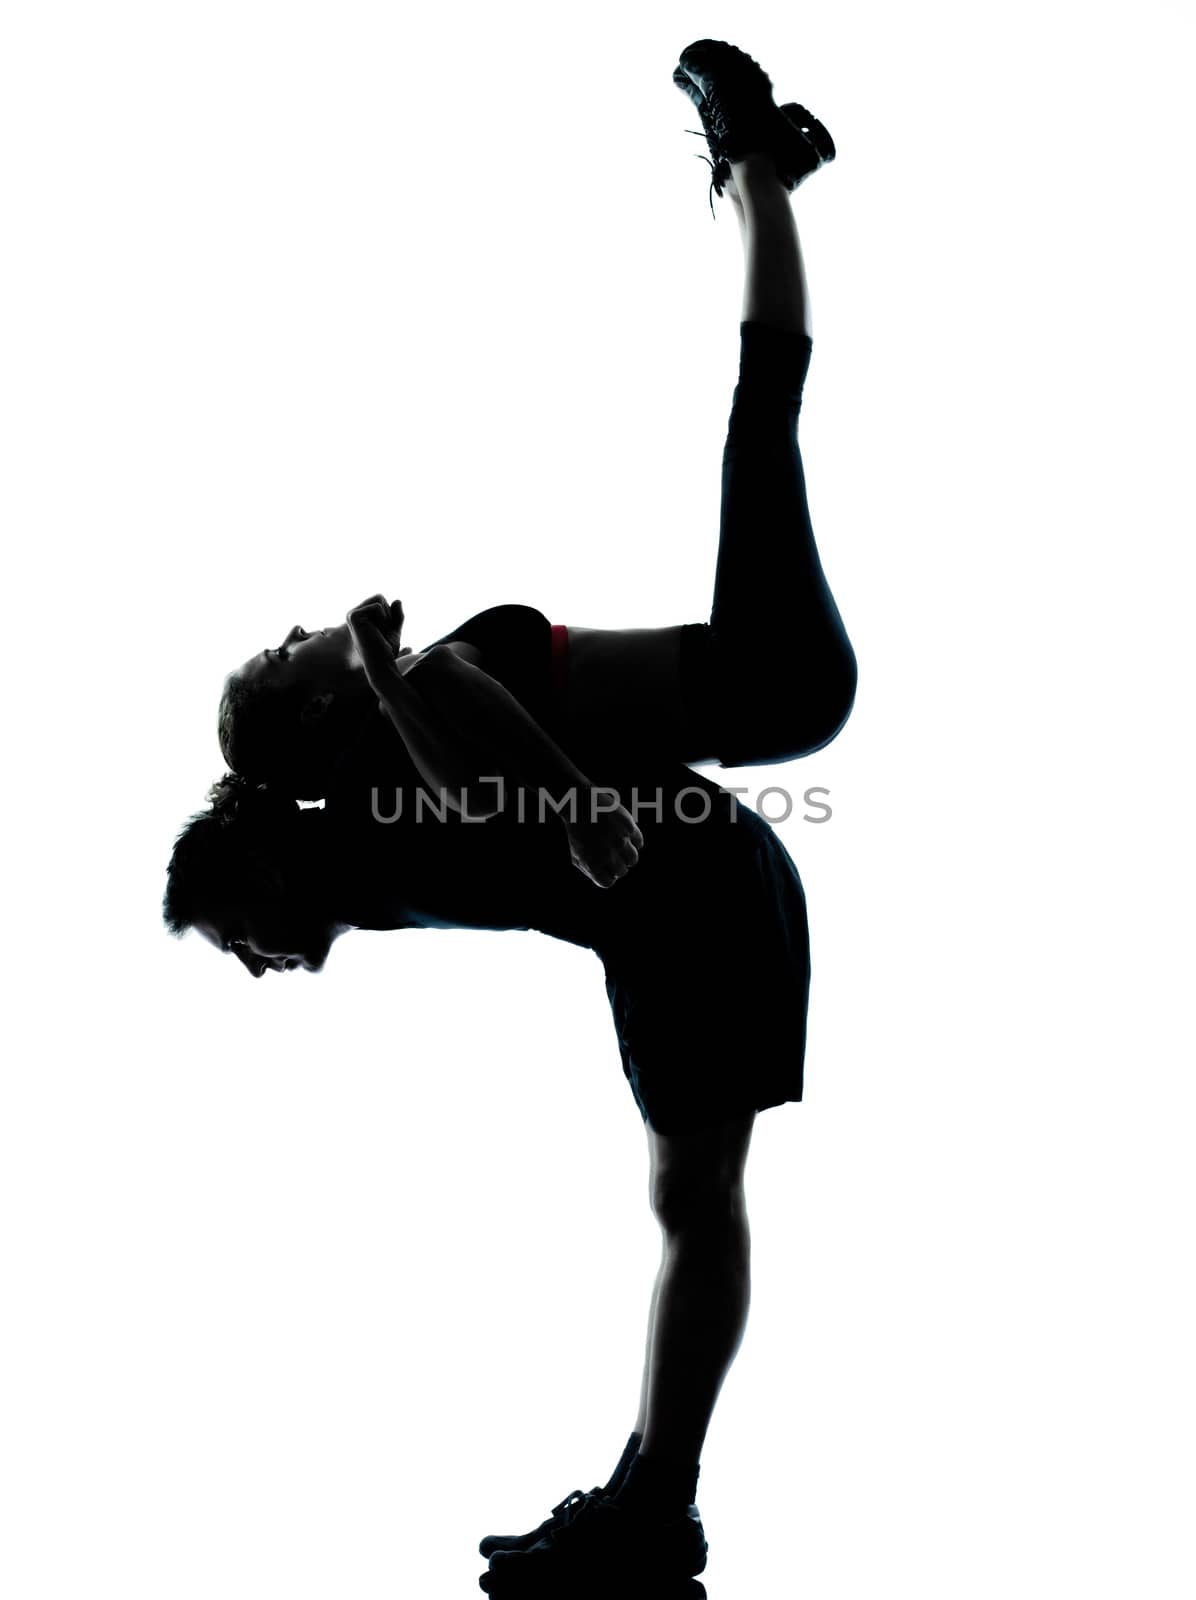 one couple man woman exercising workout aerobic fitness posture full length silhouette on studio isolated on white background